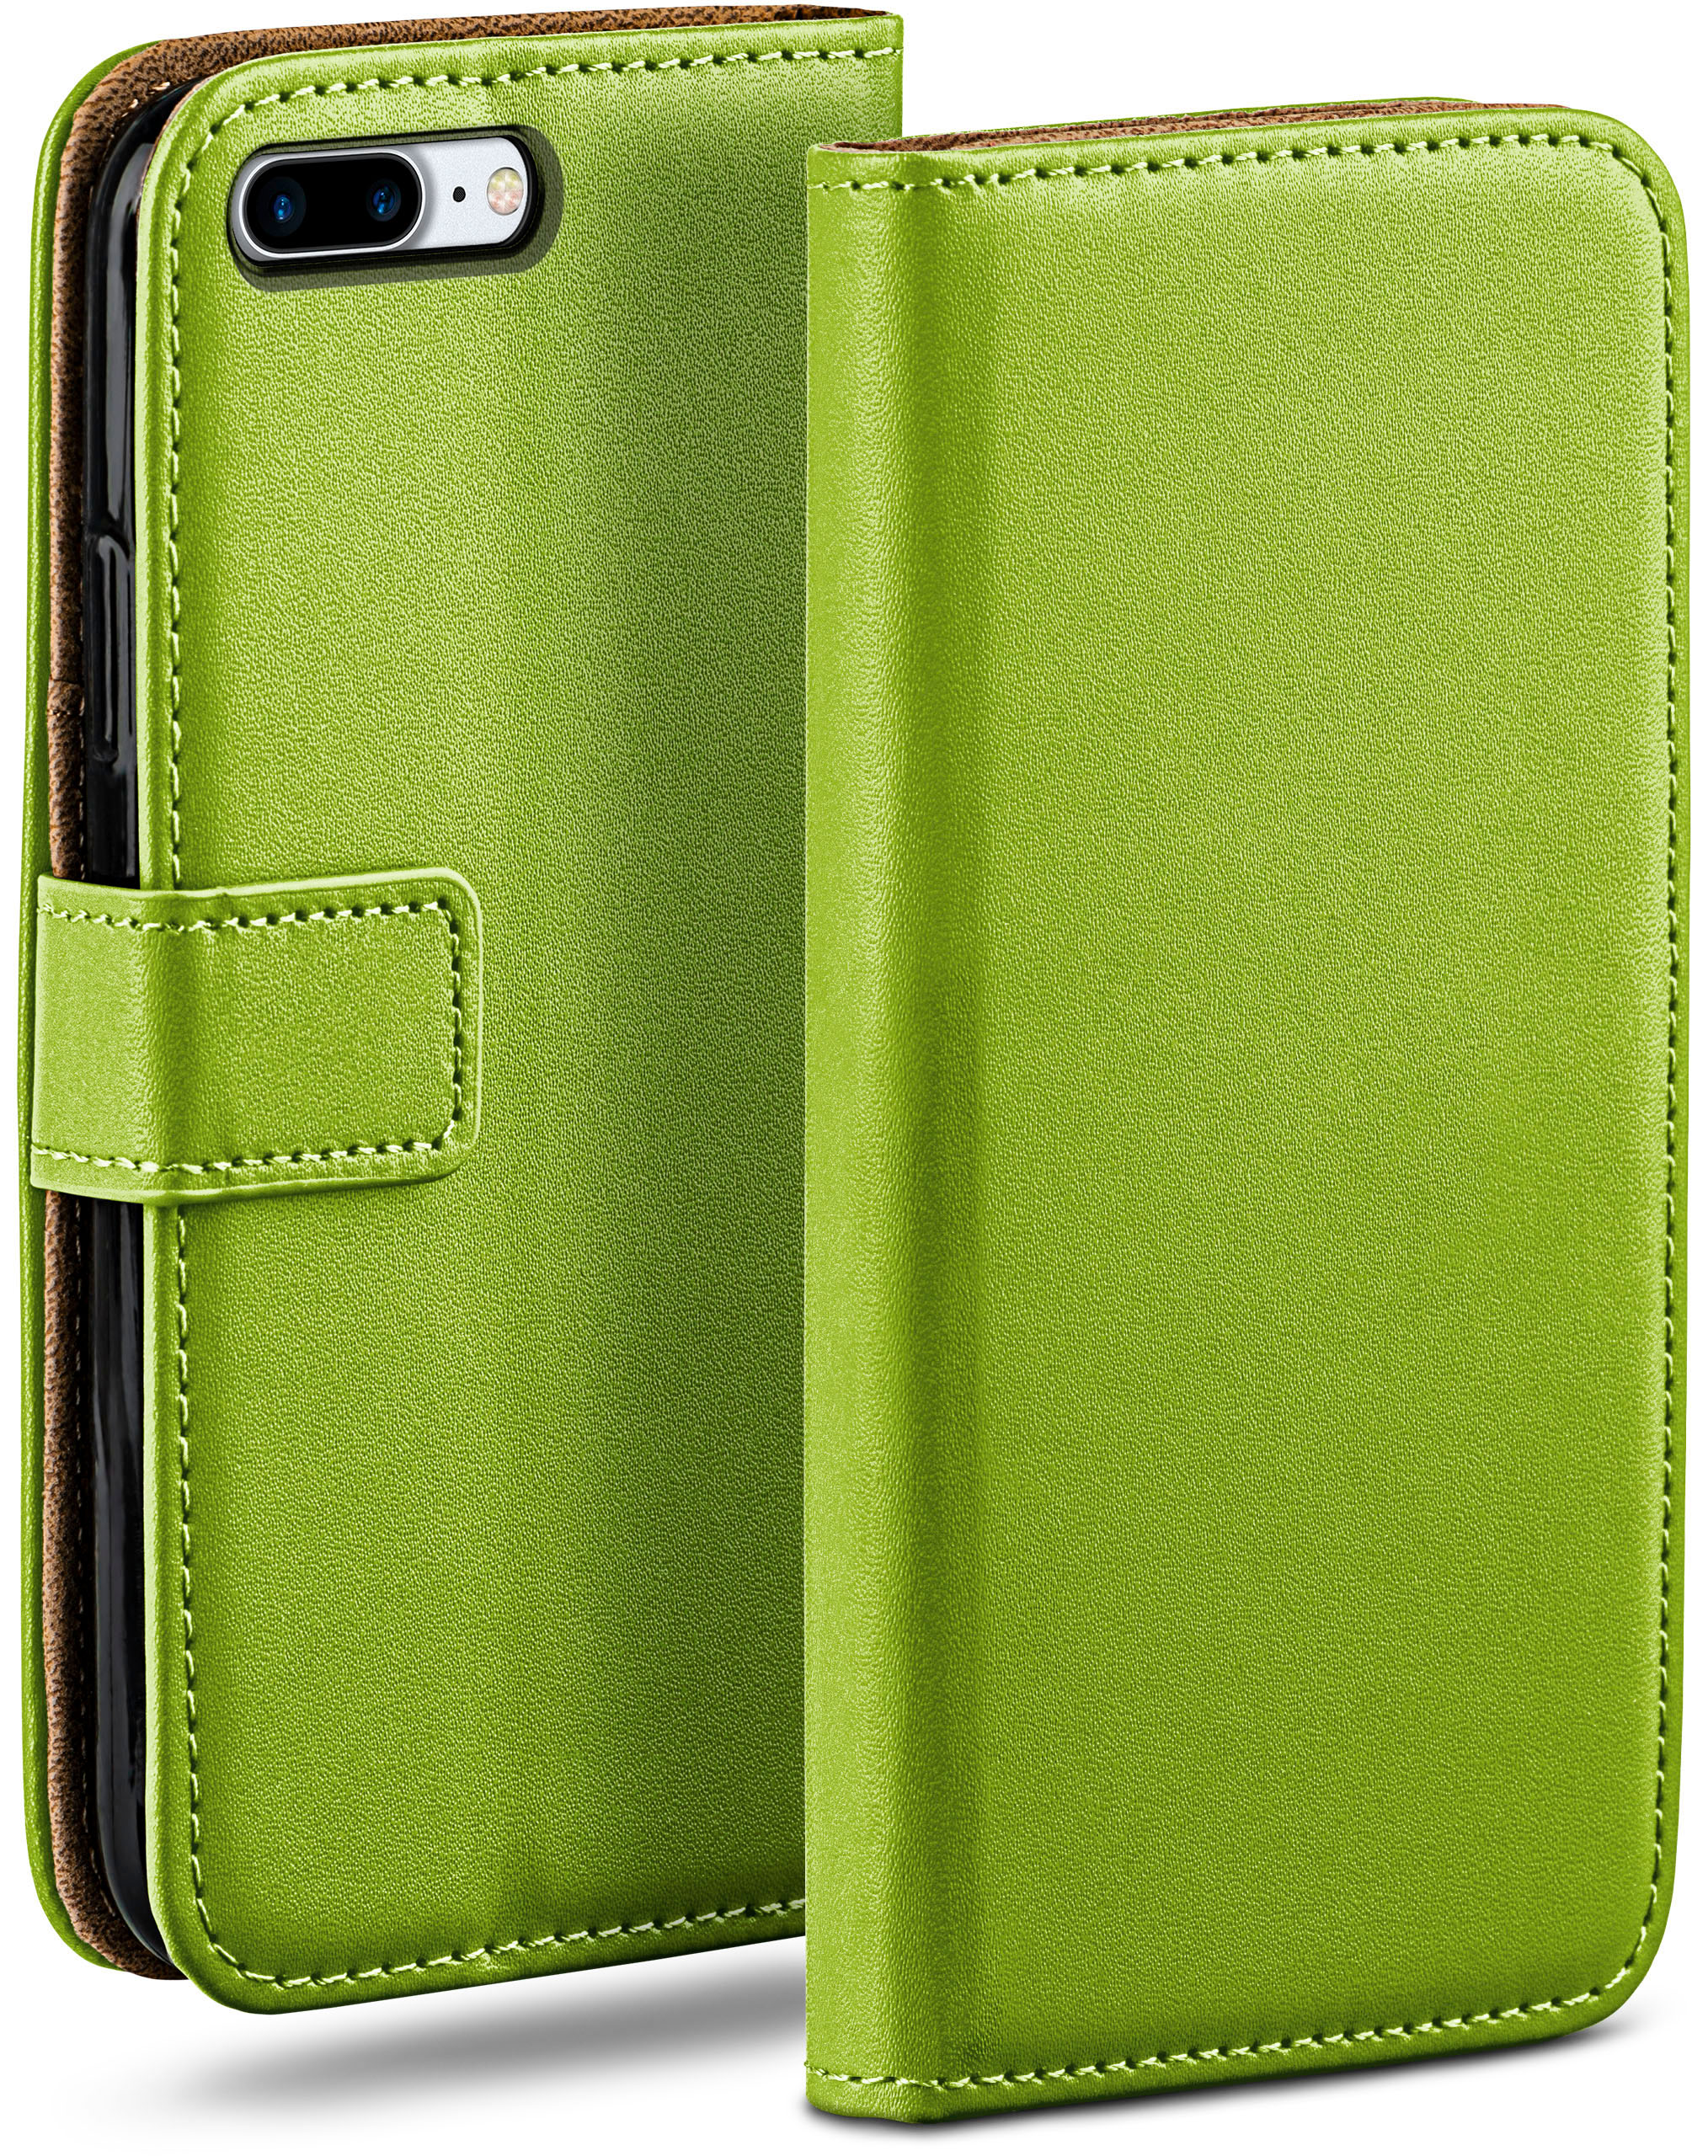 MOEX Book 8 Apple, Plus, Lime-Green iPhone iPhone Case, Bookcover, / Plus 7